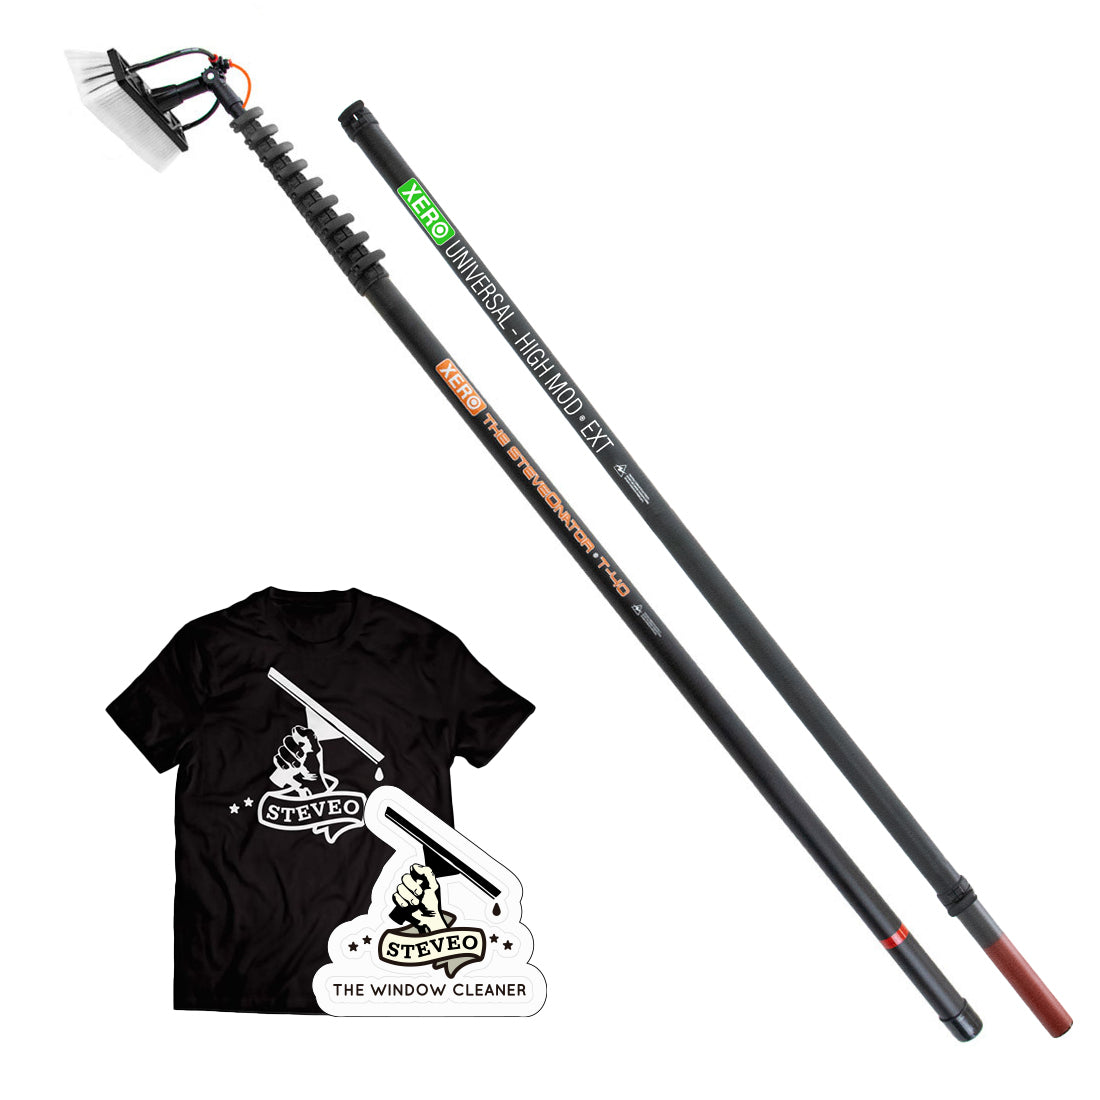 XERO SteveOnator Pole 50ft Tilted Left Side View With Steveo Shirt and Sticker Front View